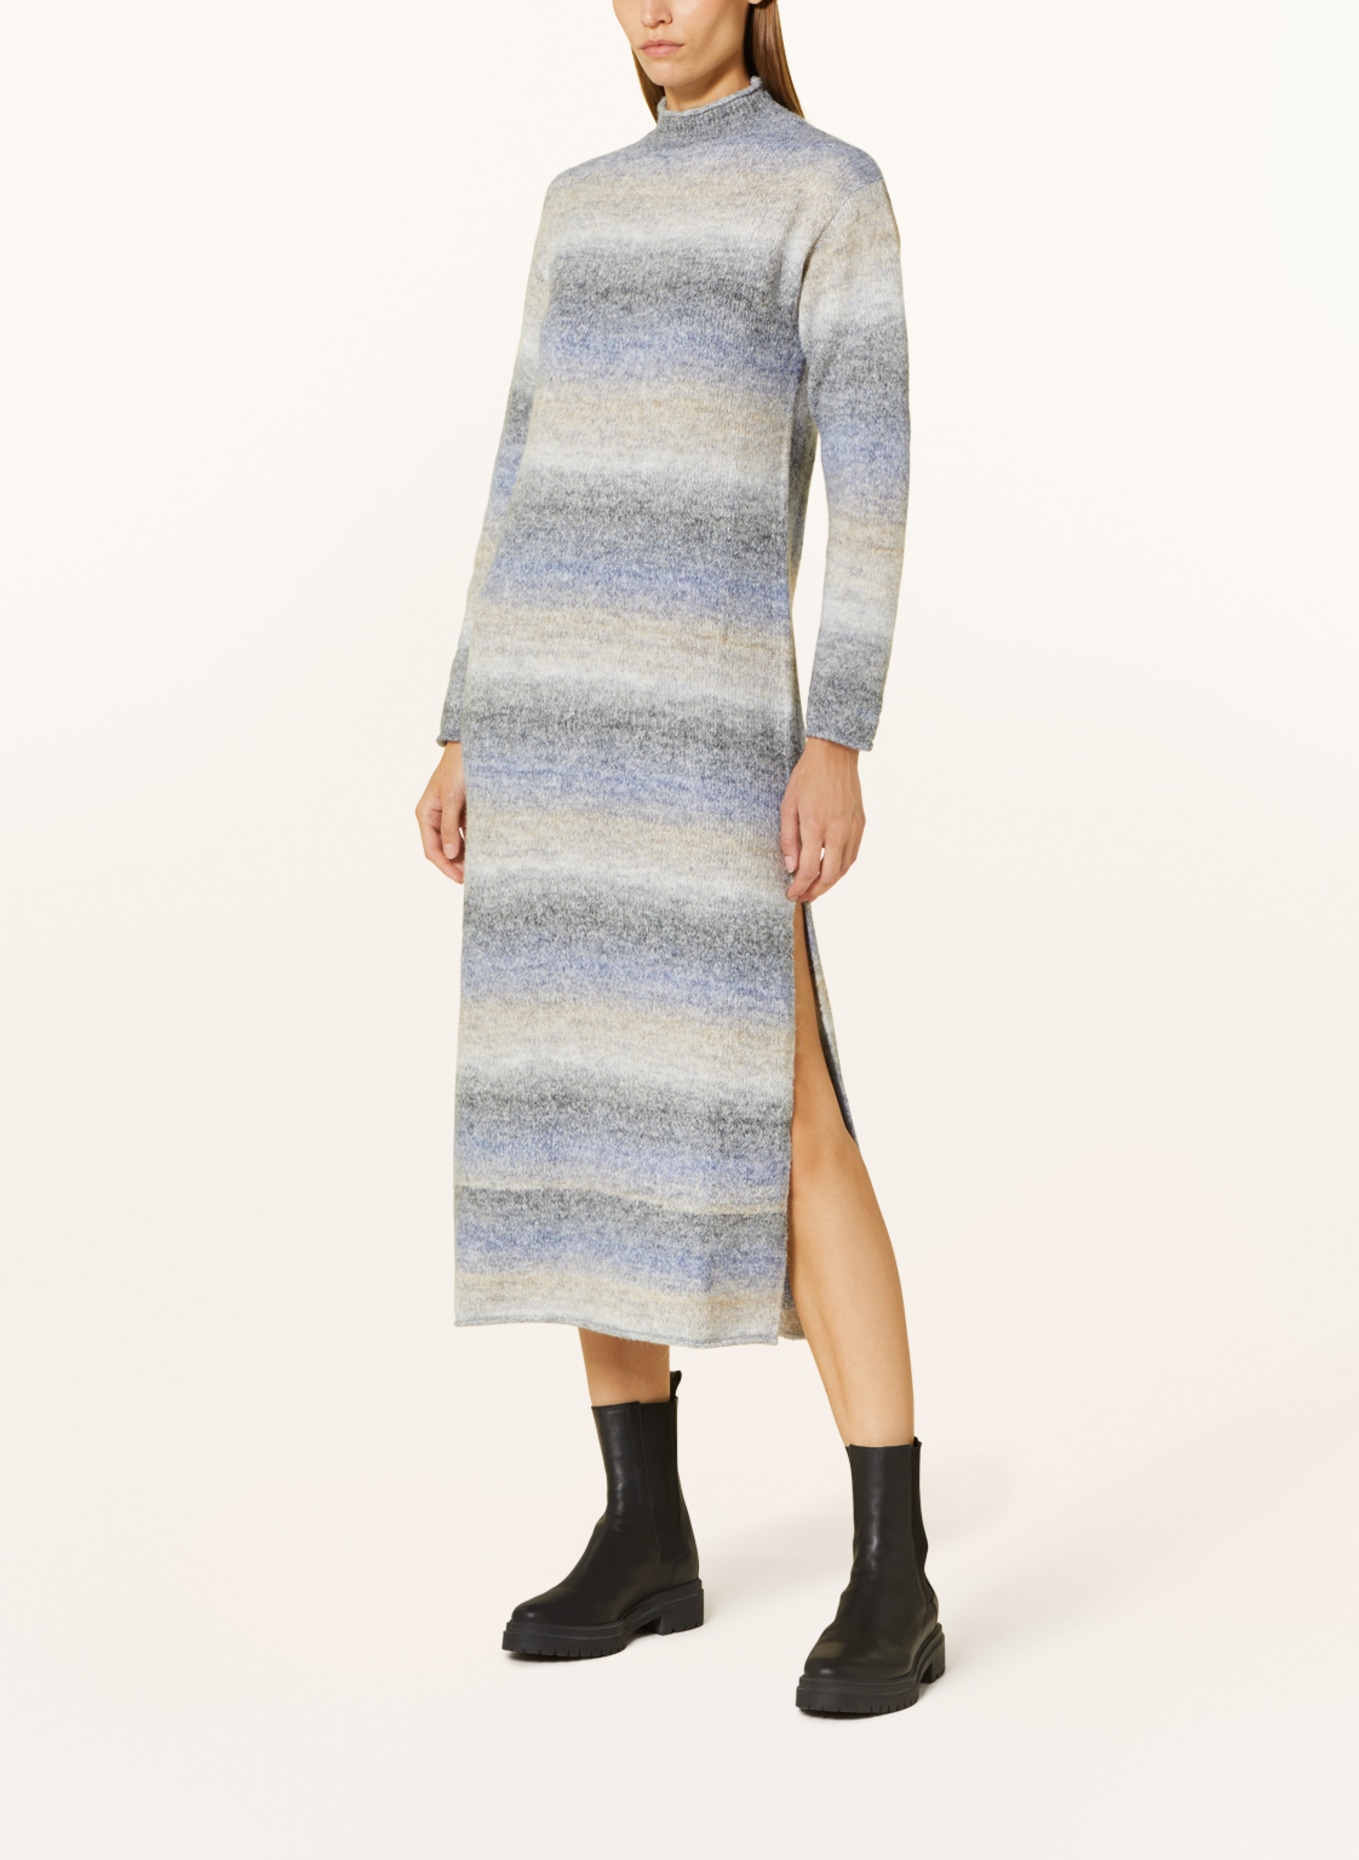 Pepe Jeans Knit dress EDITH, Color: BLUE GRAY/ LIGHT GRAY/ GRAY (Image 2)